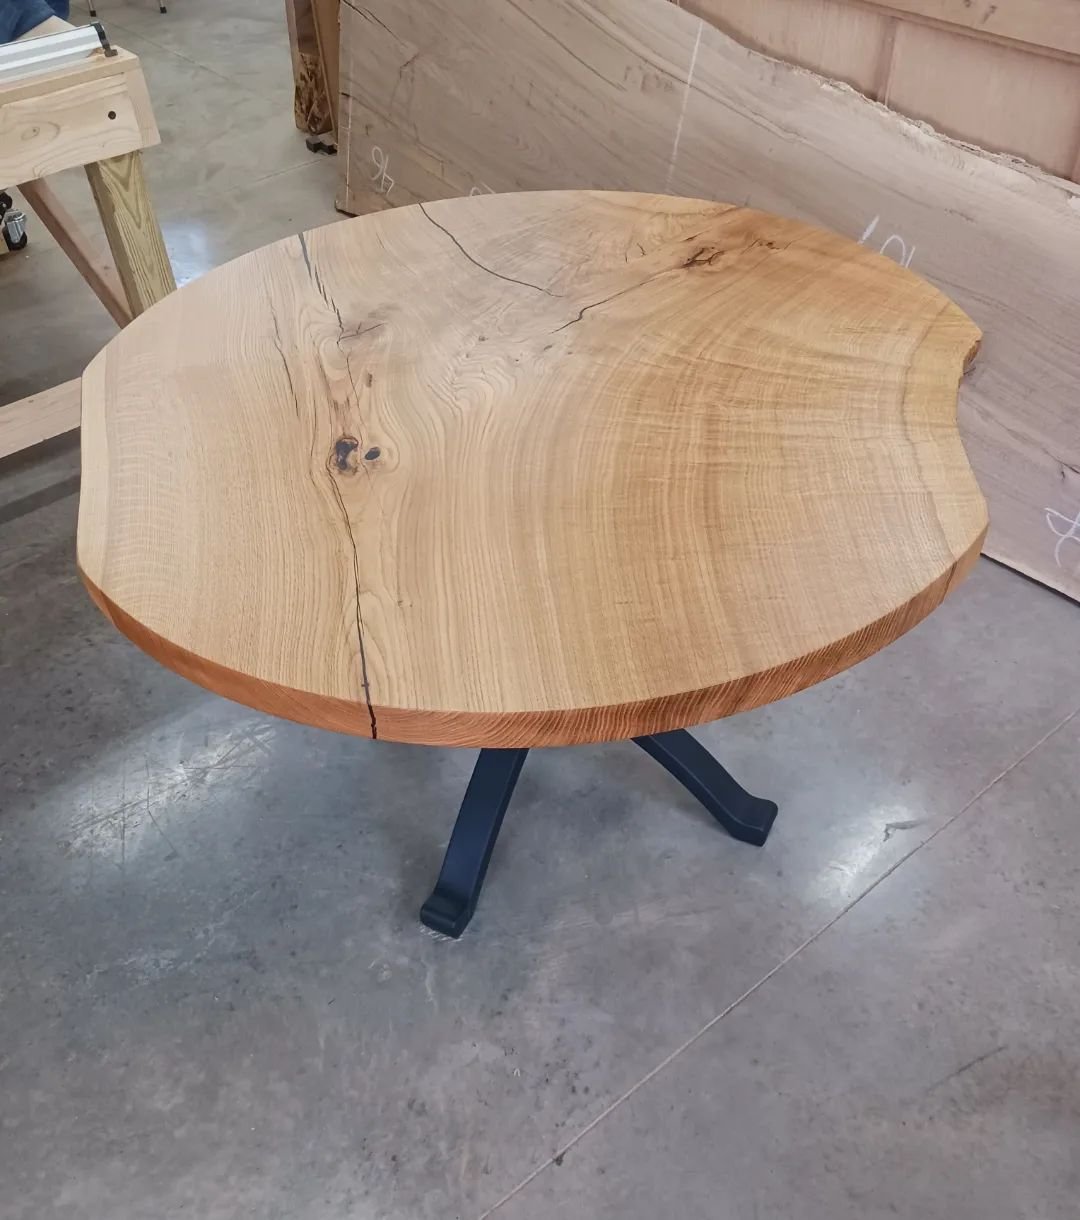 Finished! Just in time for lunch. 4ft round(ish) card table. White oak slab with black epoxy on @flowyline_design base. Definitely my favorite so far! 

C channel from @bidwellwoodandiron 
finished with @odiesoil

Text me for custom orders or fill ou